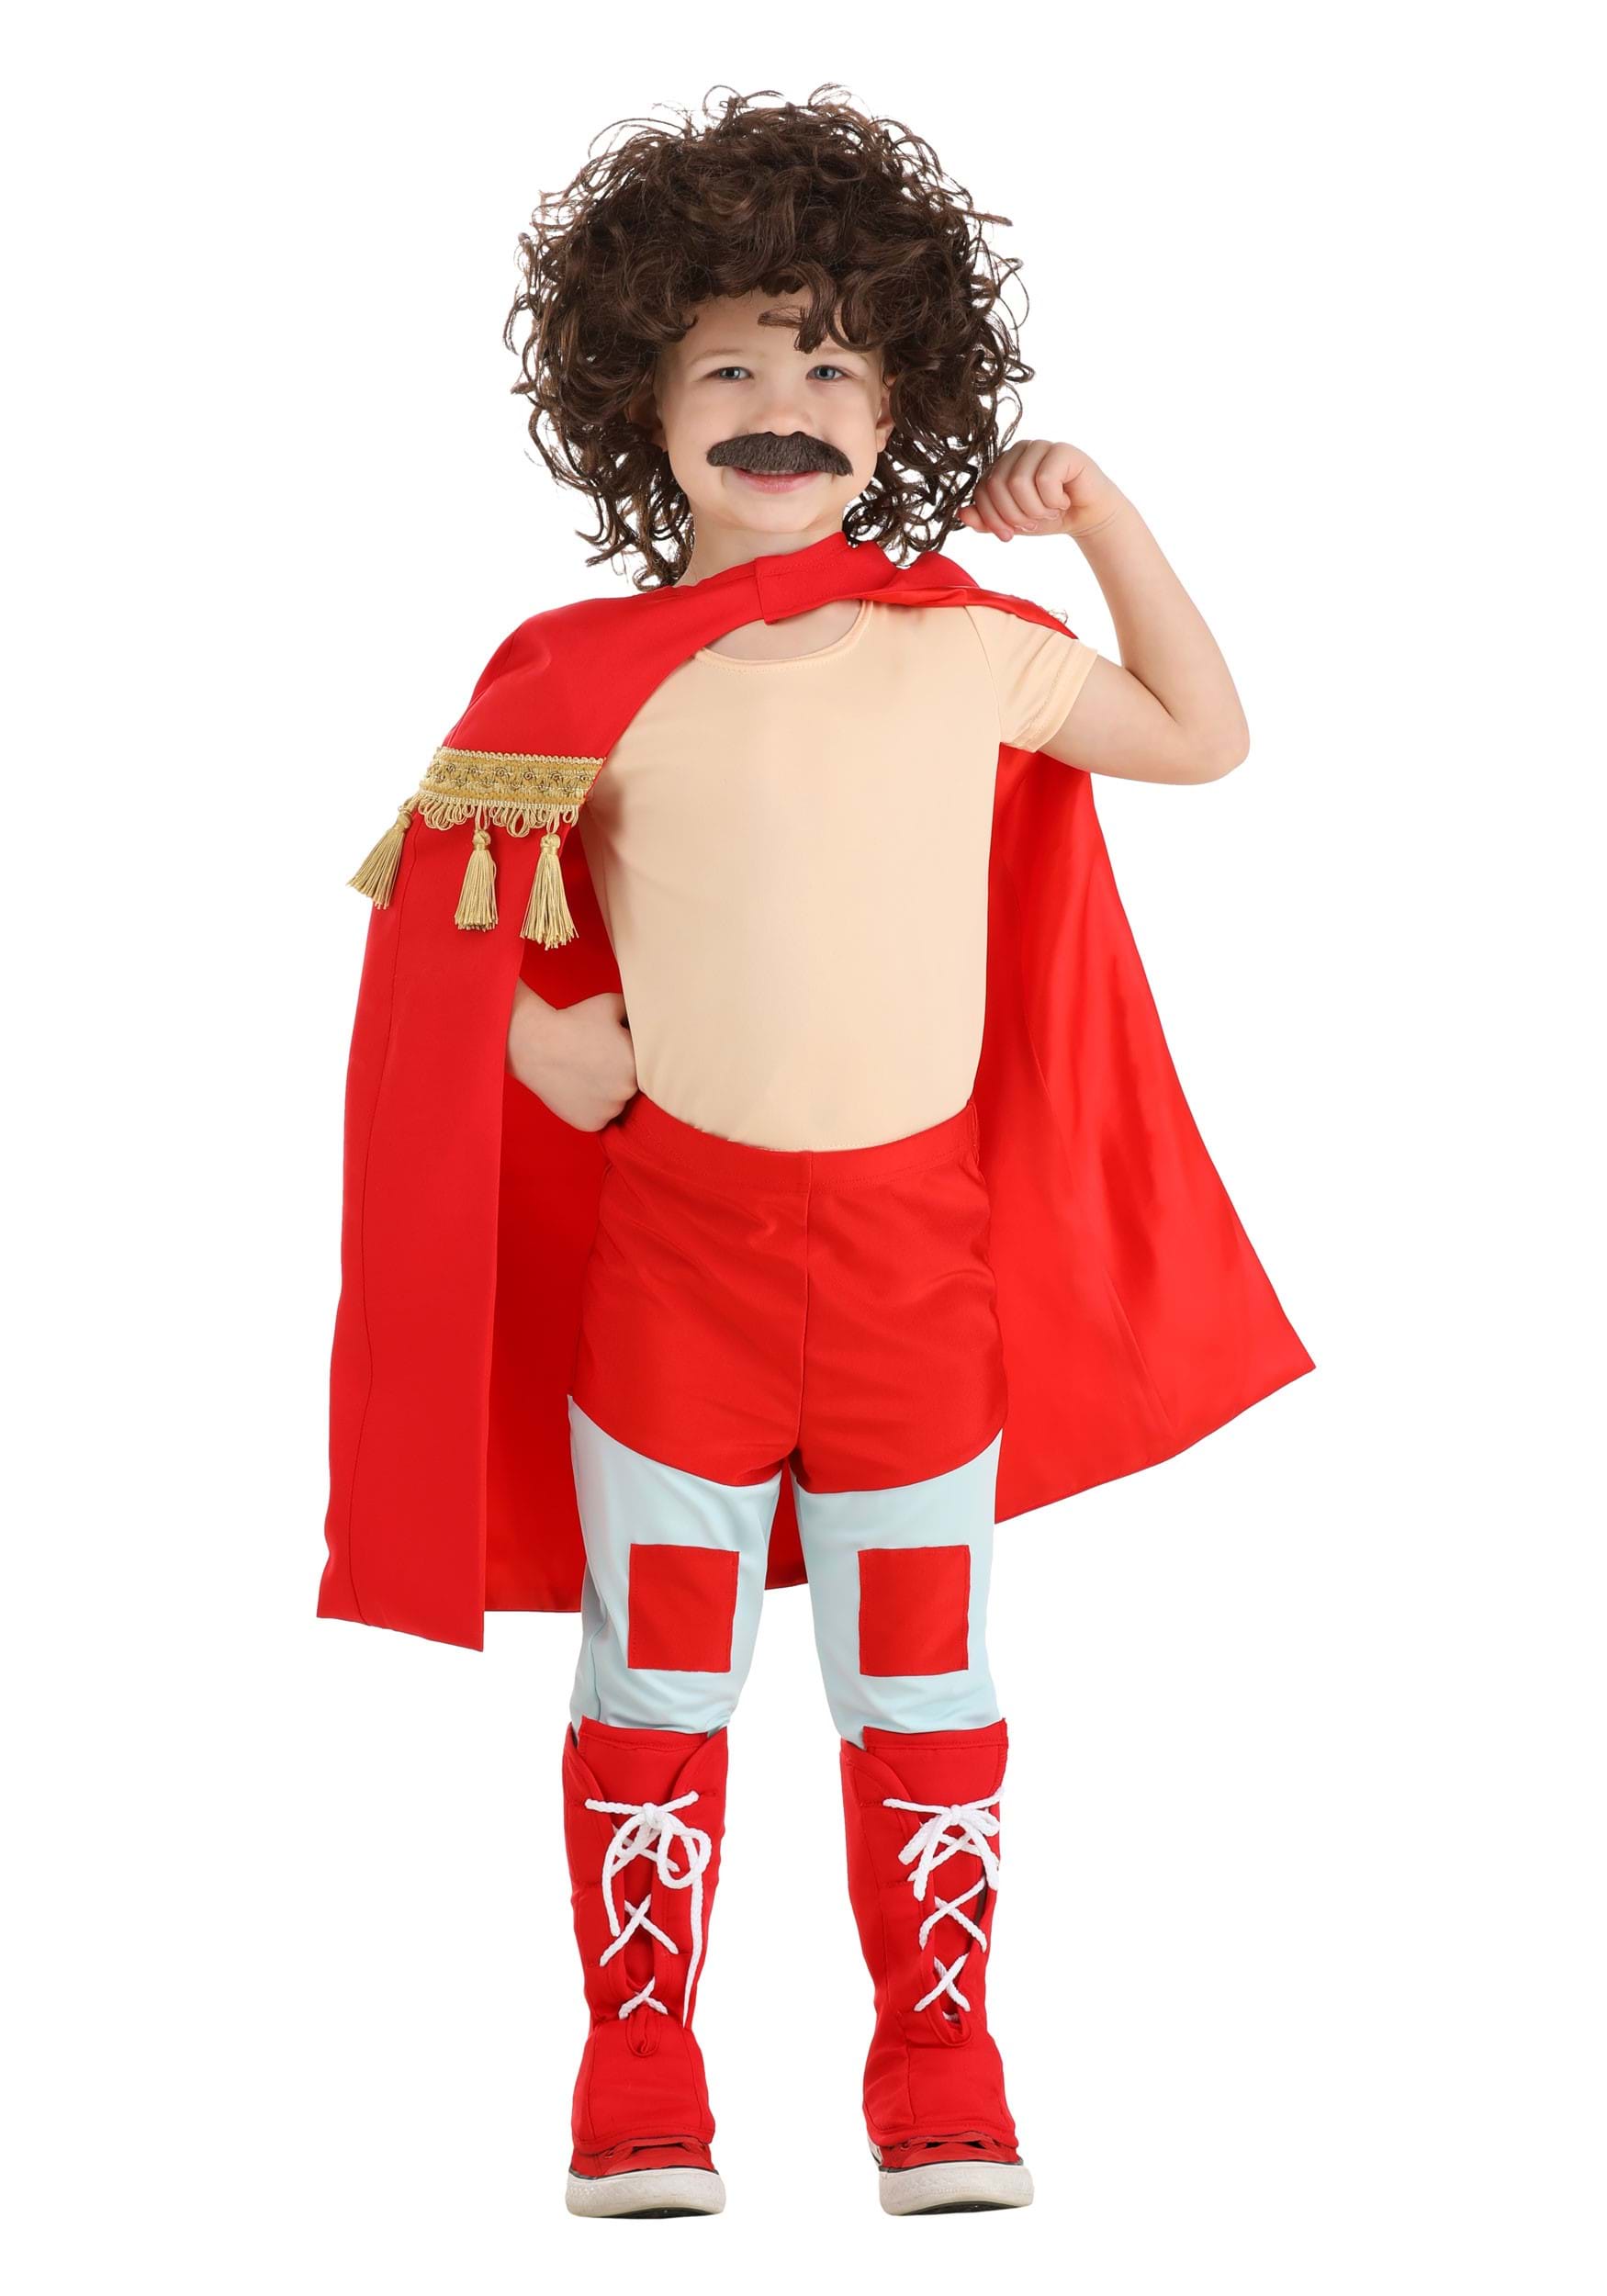 Photos - Fancy Dress FUN Costumes Nacho Libre Boys Costume for Toddlers Red/Skin Color FUN6